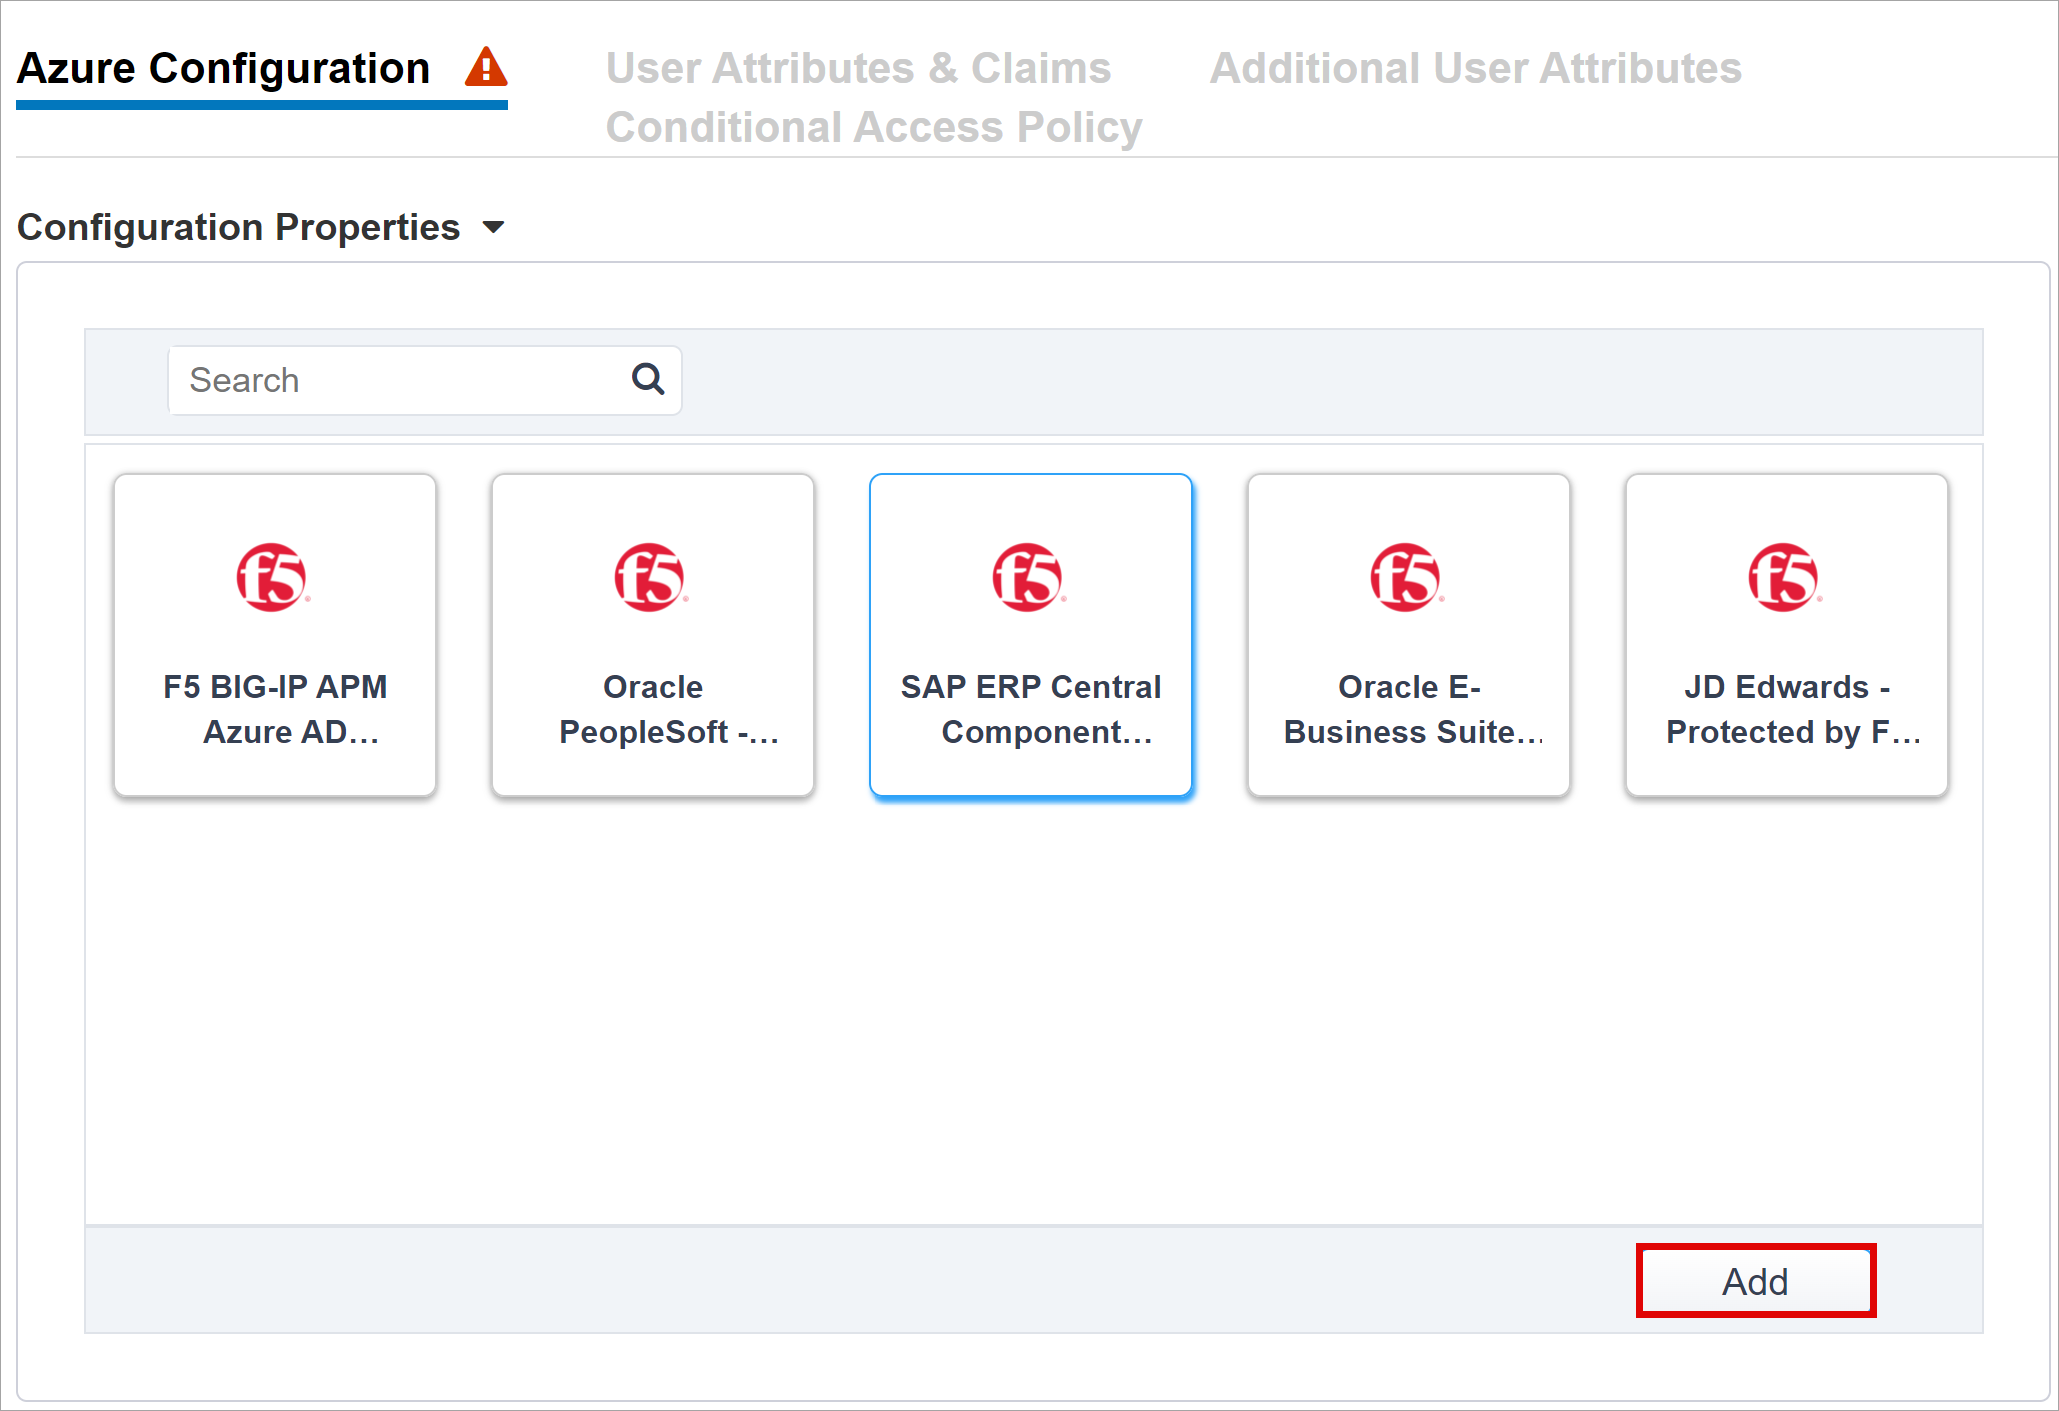 Screenshot of the SAP ERP Central Component option on Azure Configuration and the Add button.